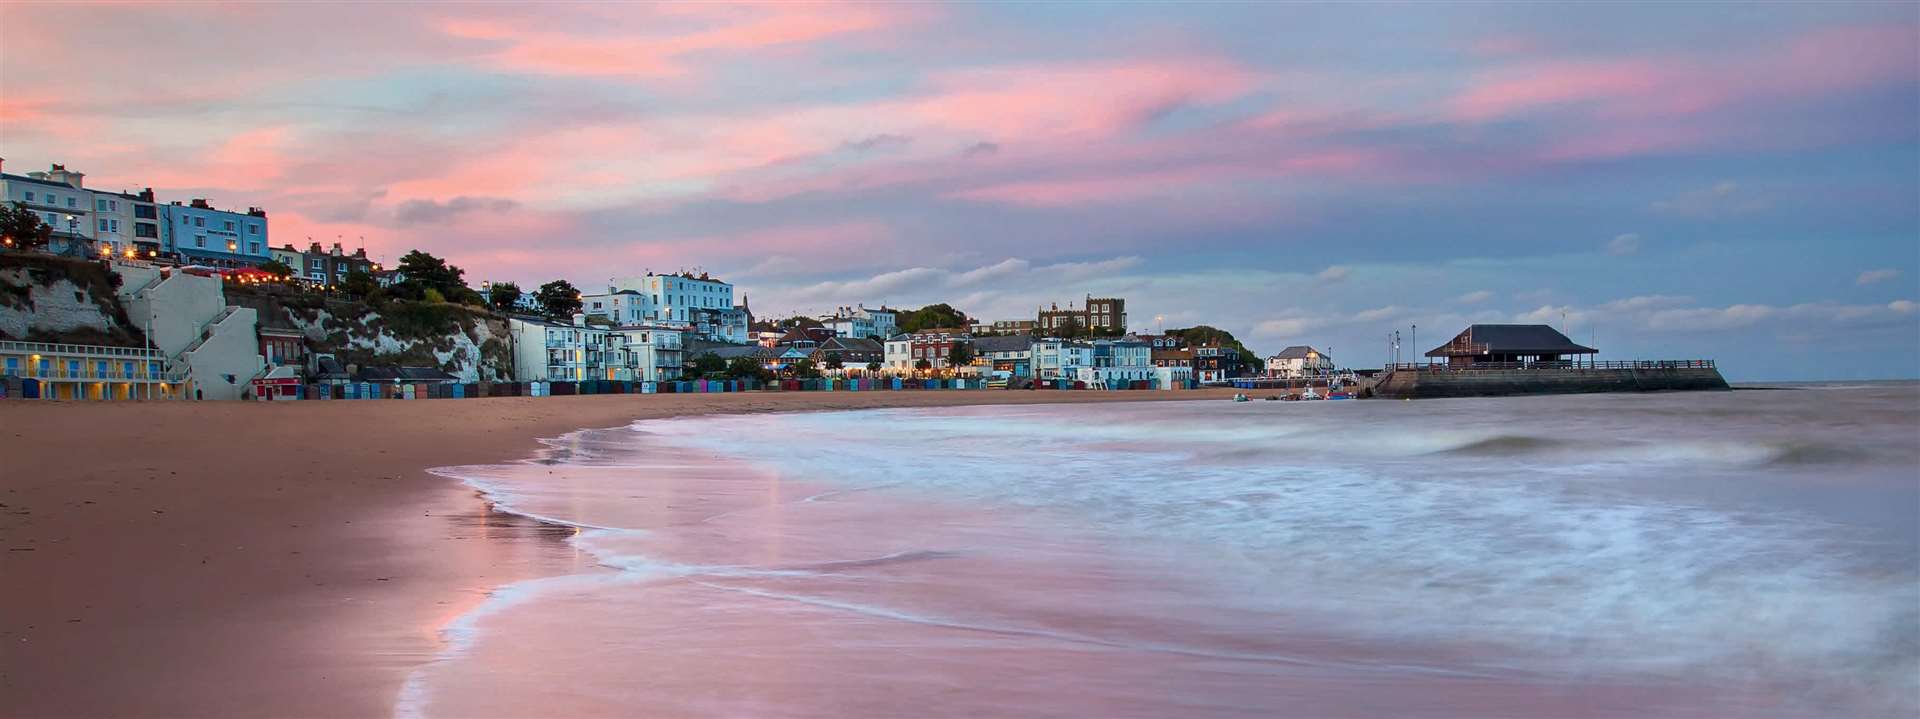 Apart from the seaside and hotel appeal of Broadstairs, there is also an abundance of good restaurants and eateries (3442941)